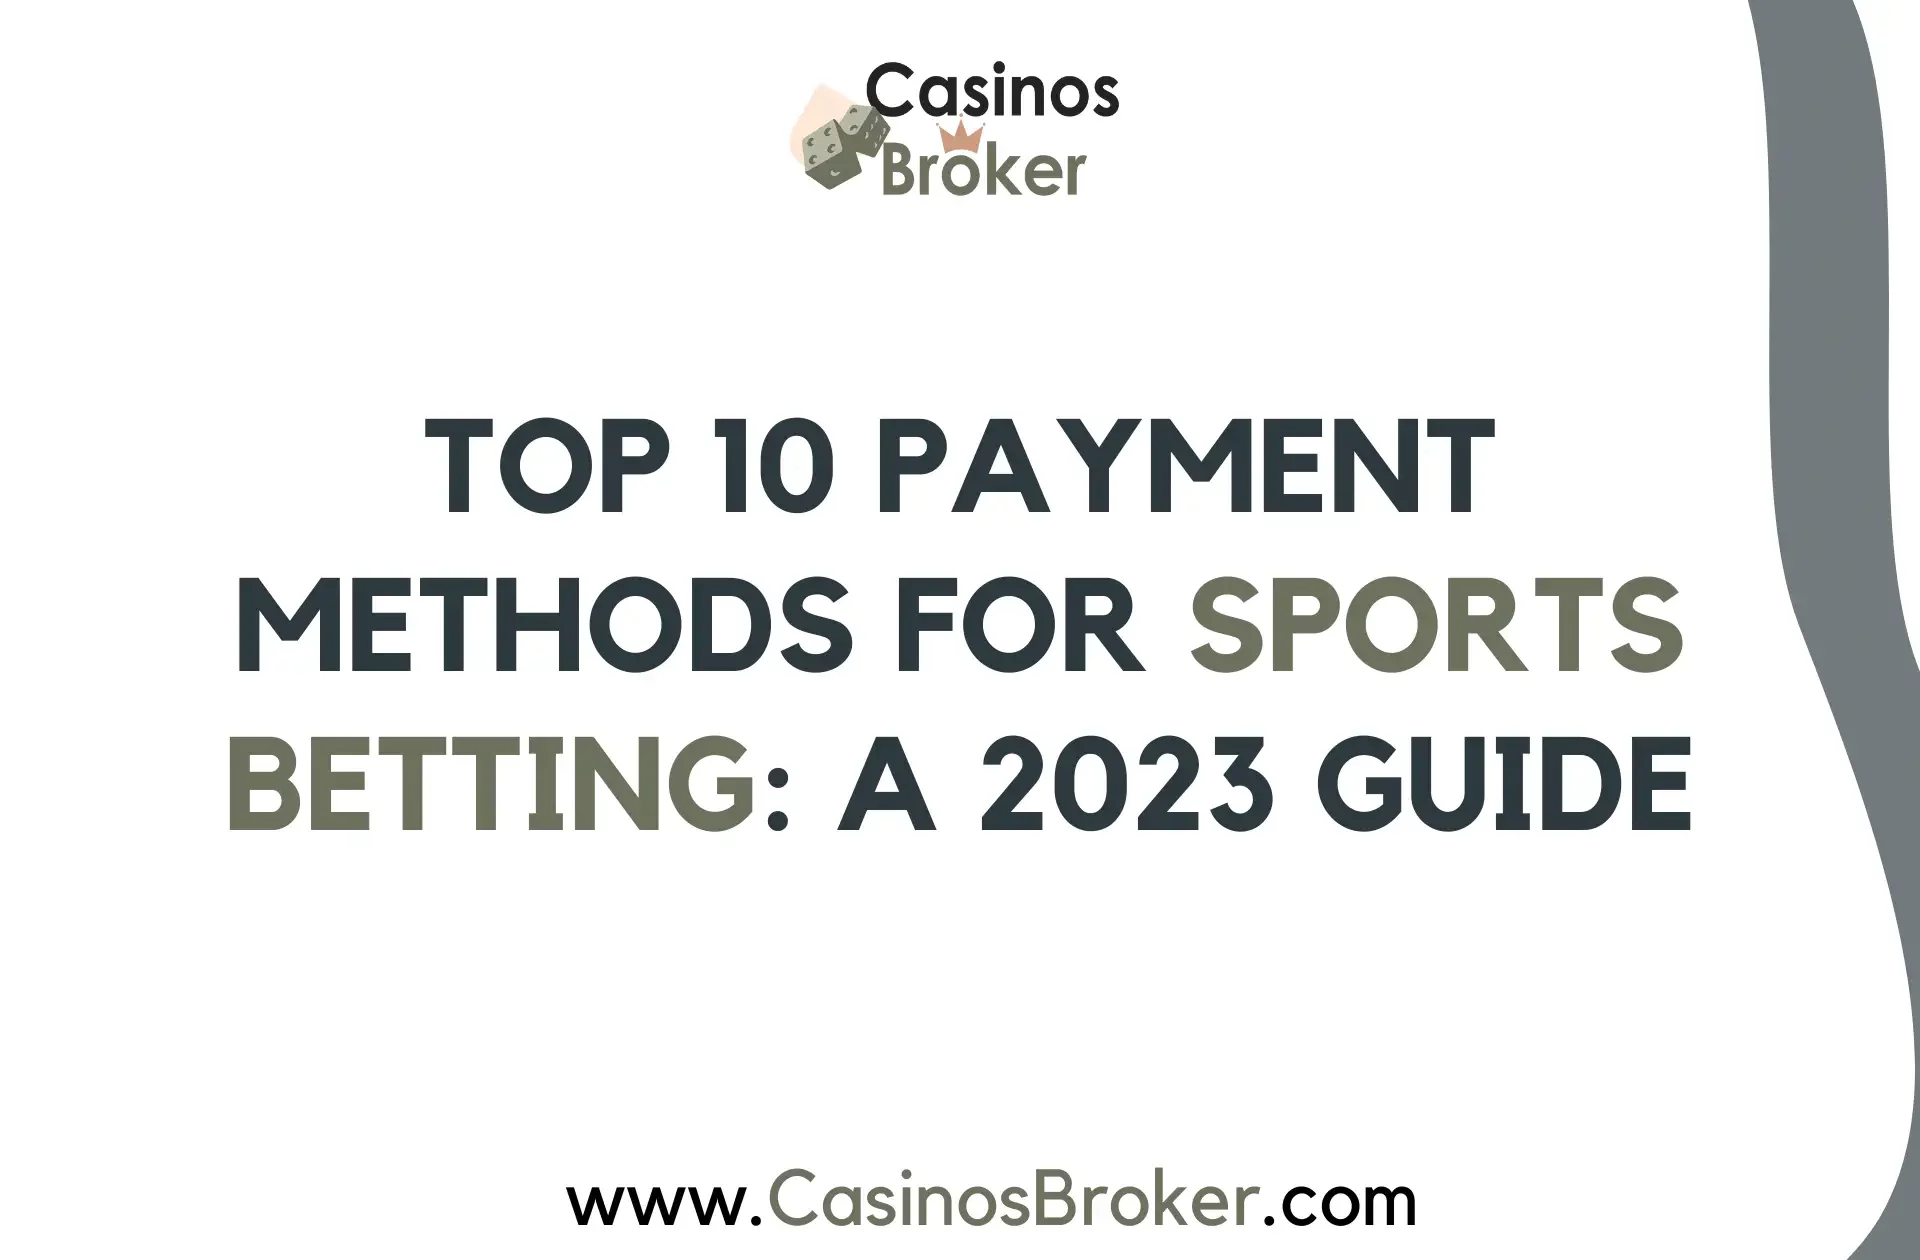 Top 10 Payment Methods for Sports Betting: A 2023 Guide